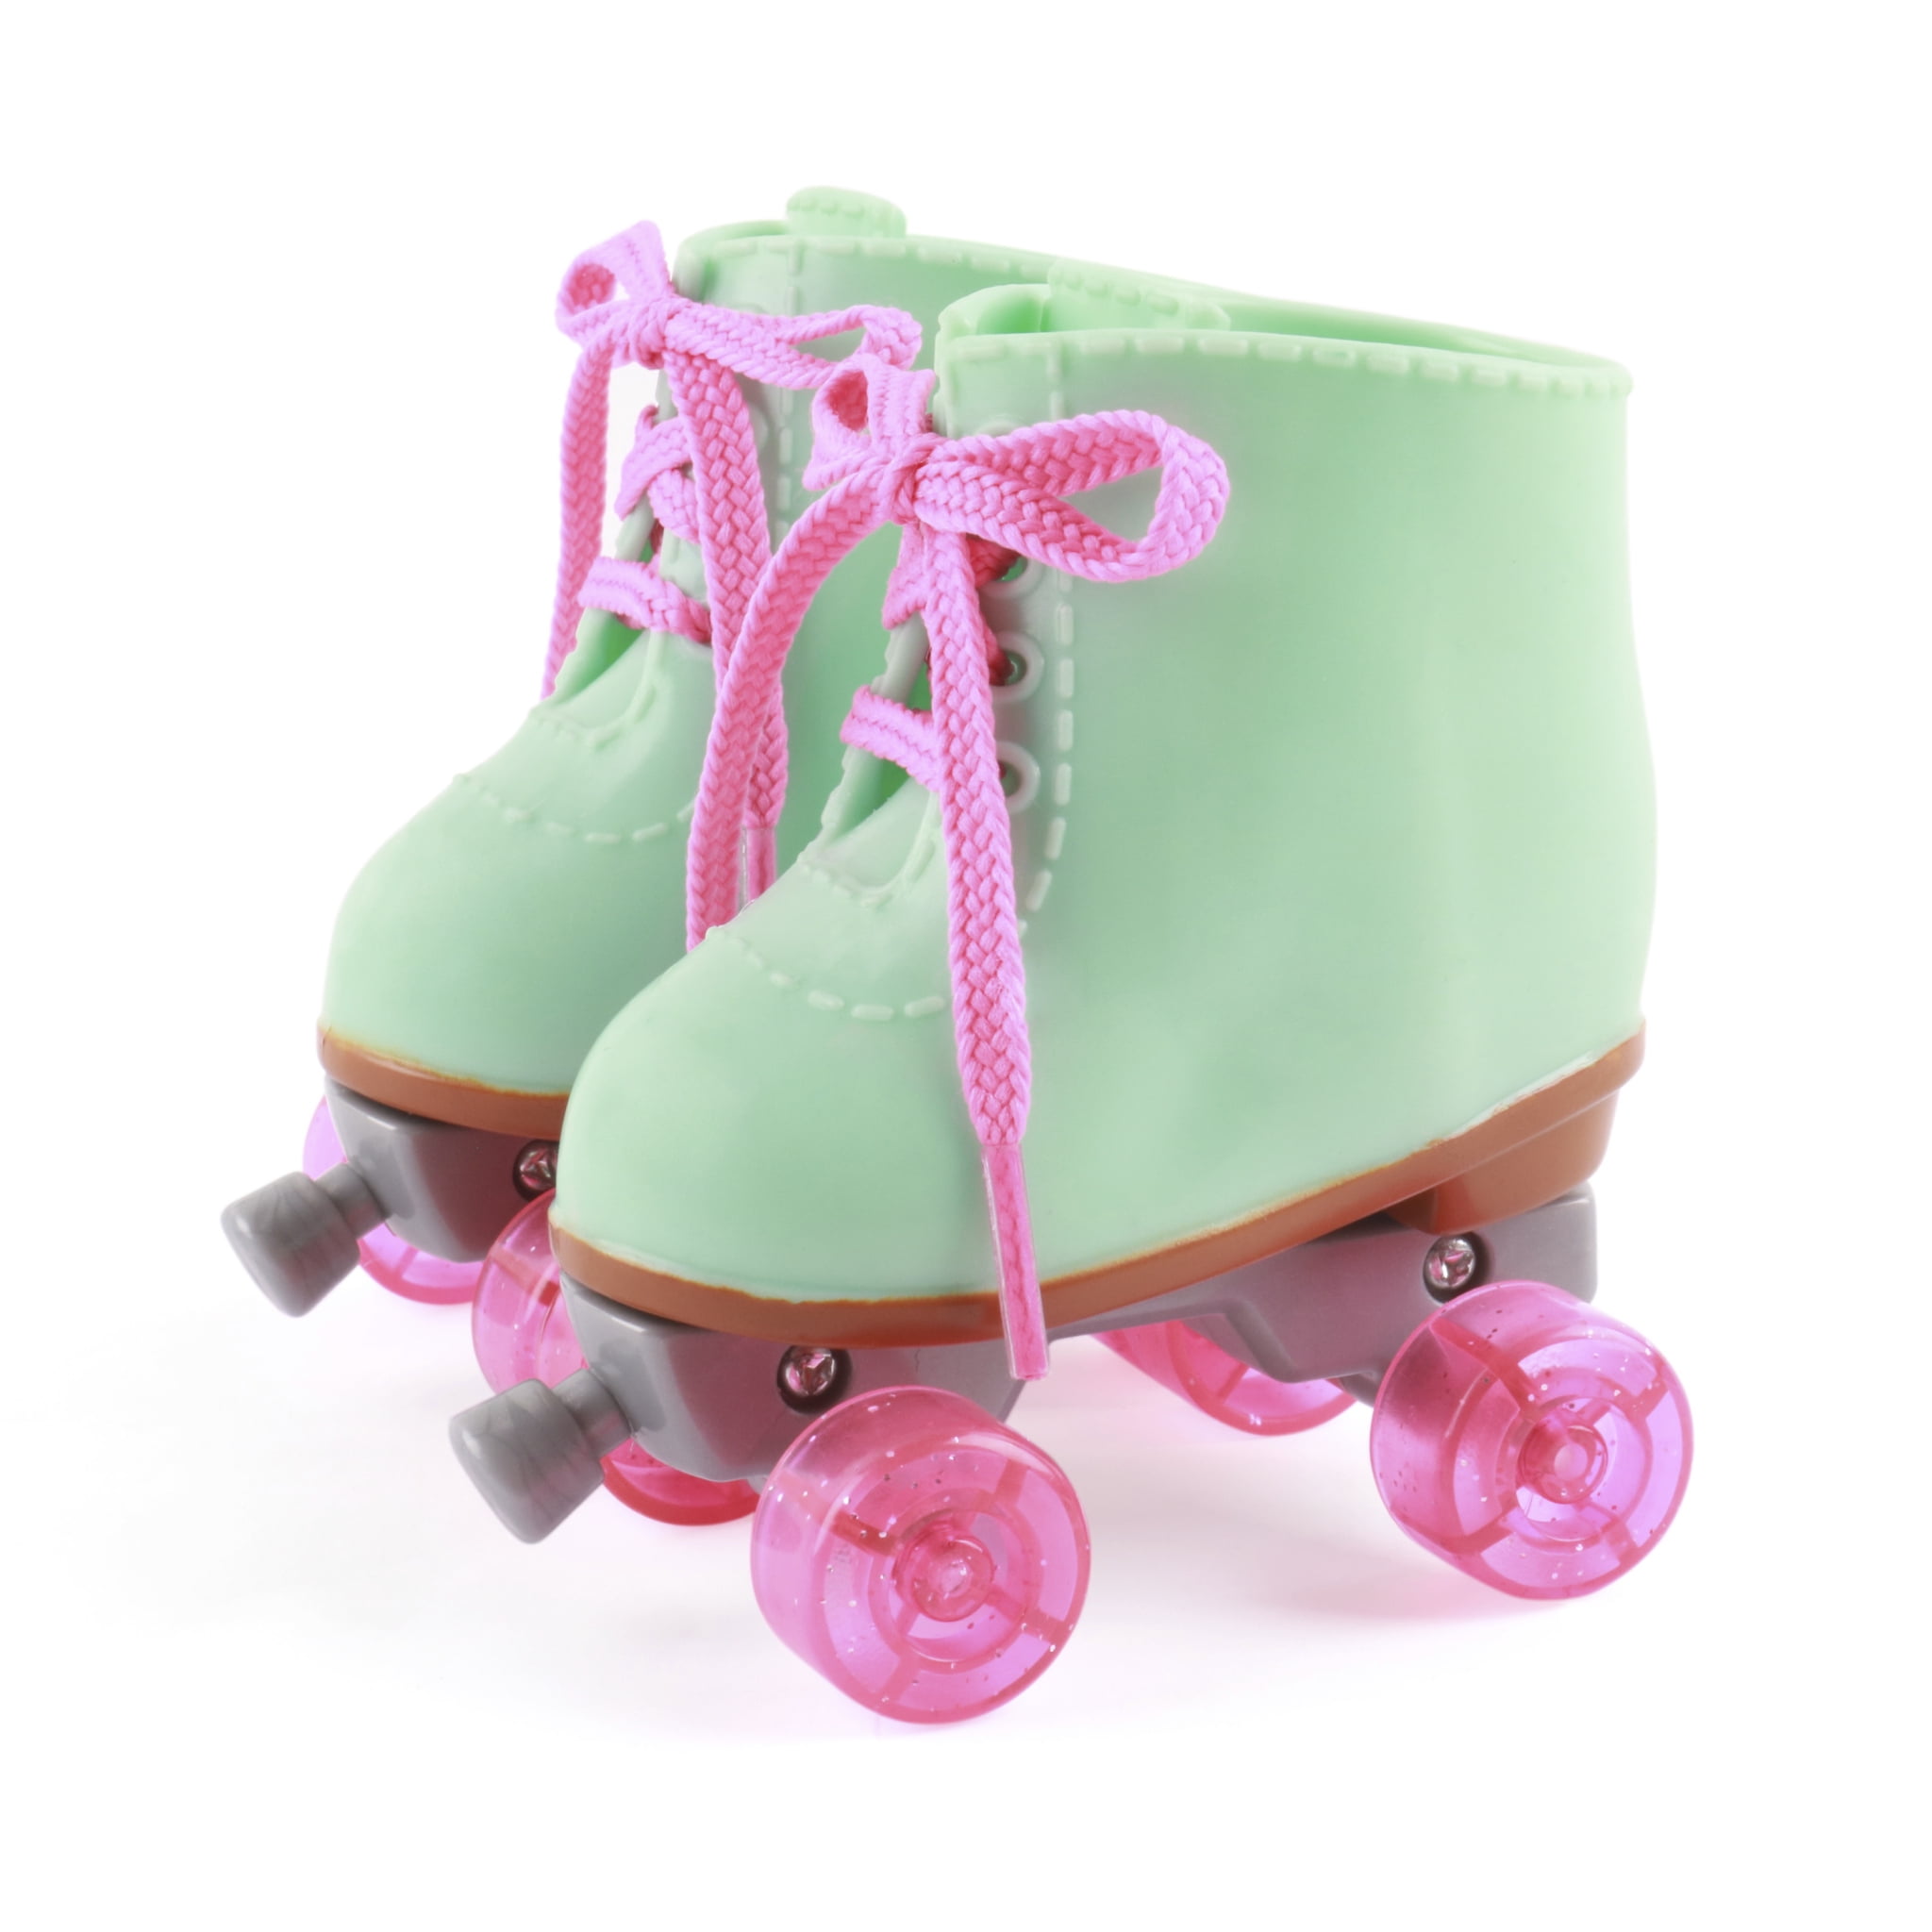 My Life As Mint and Pink Roller Skates 